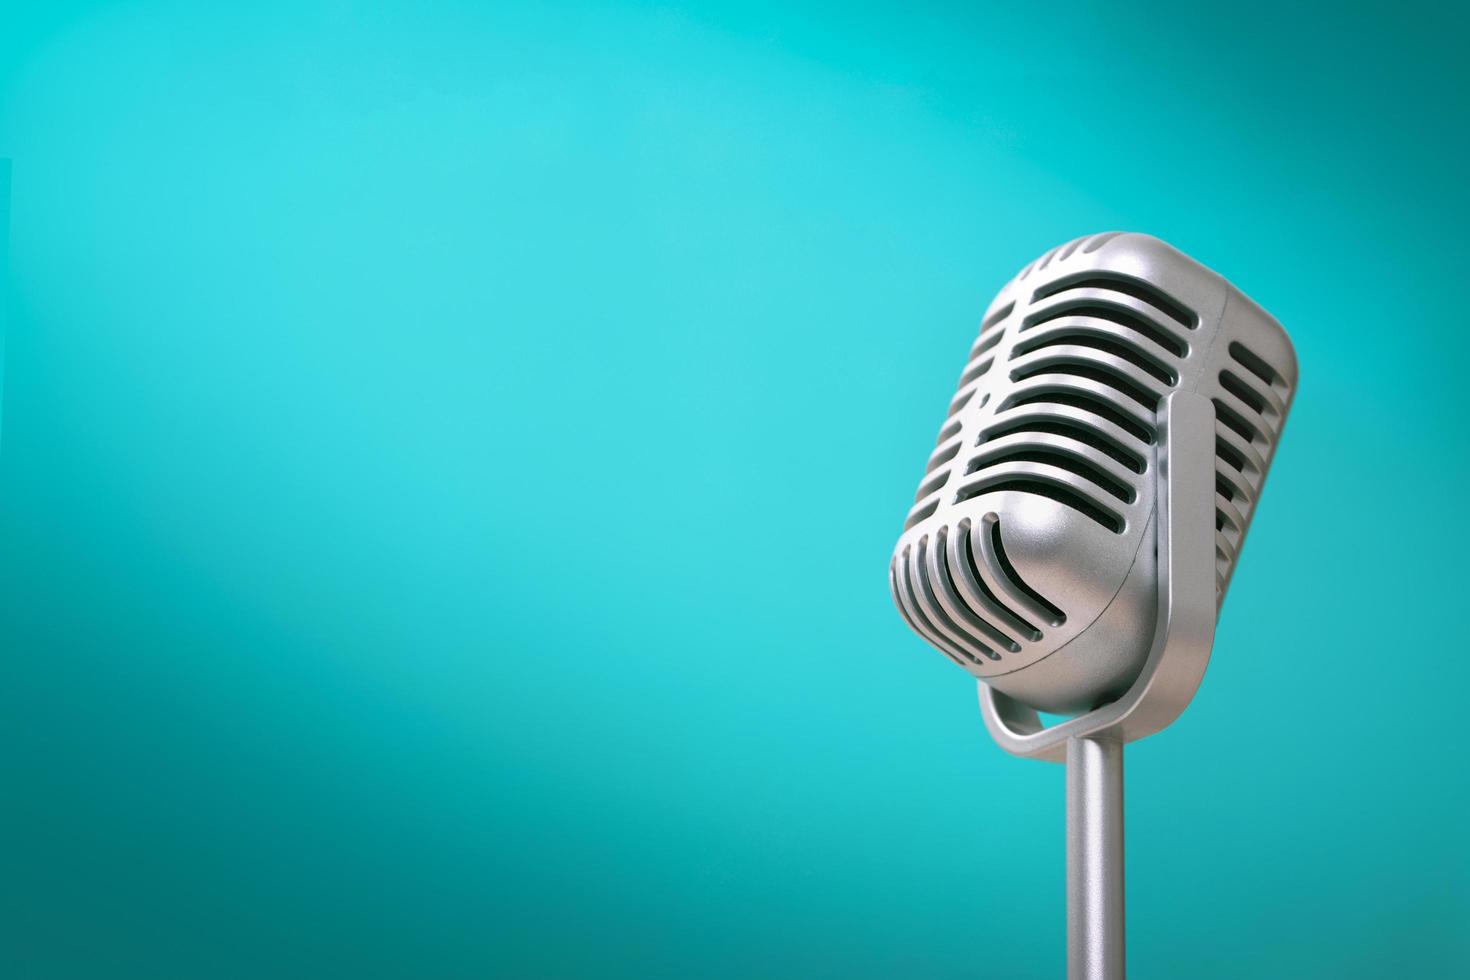 Retro style microphone on green background photo